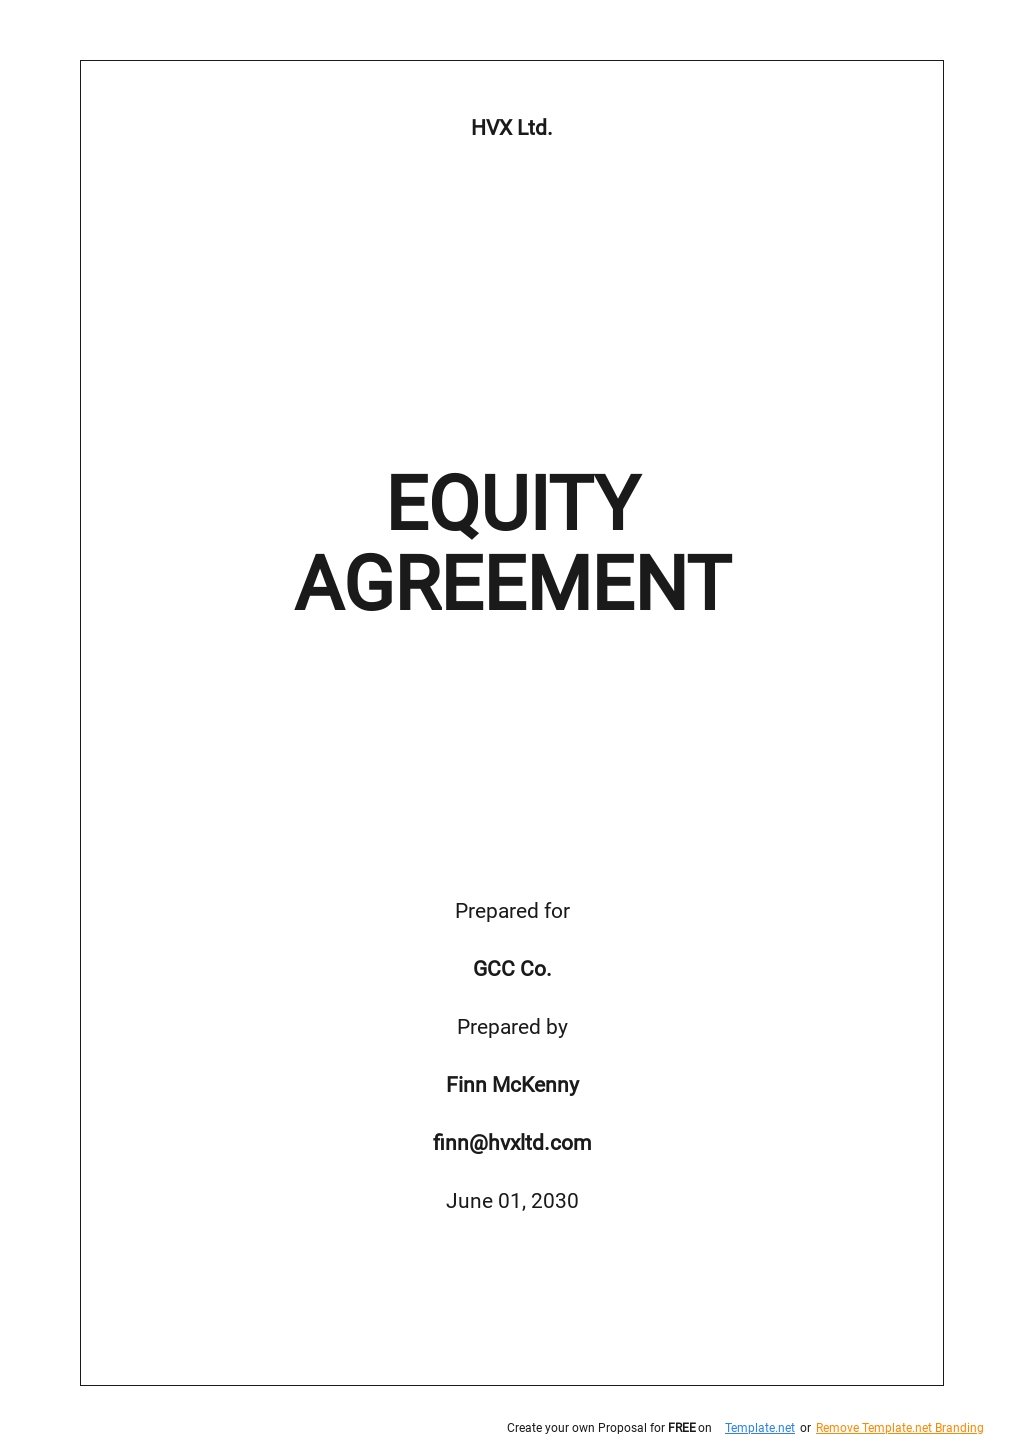 Equity Agreement Templates Documents, Design, Free, Download